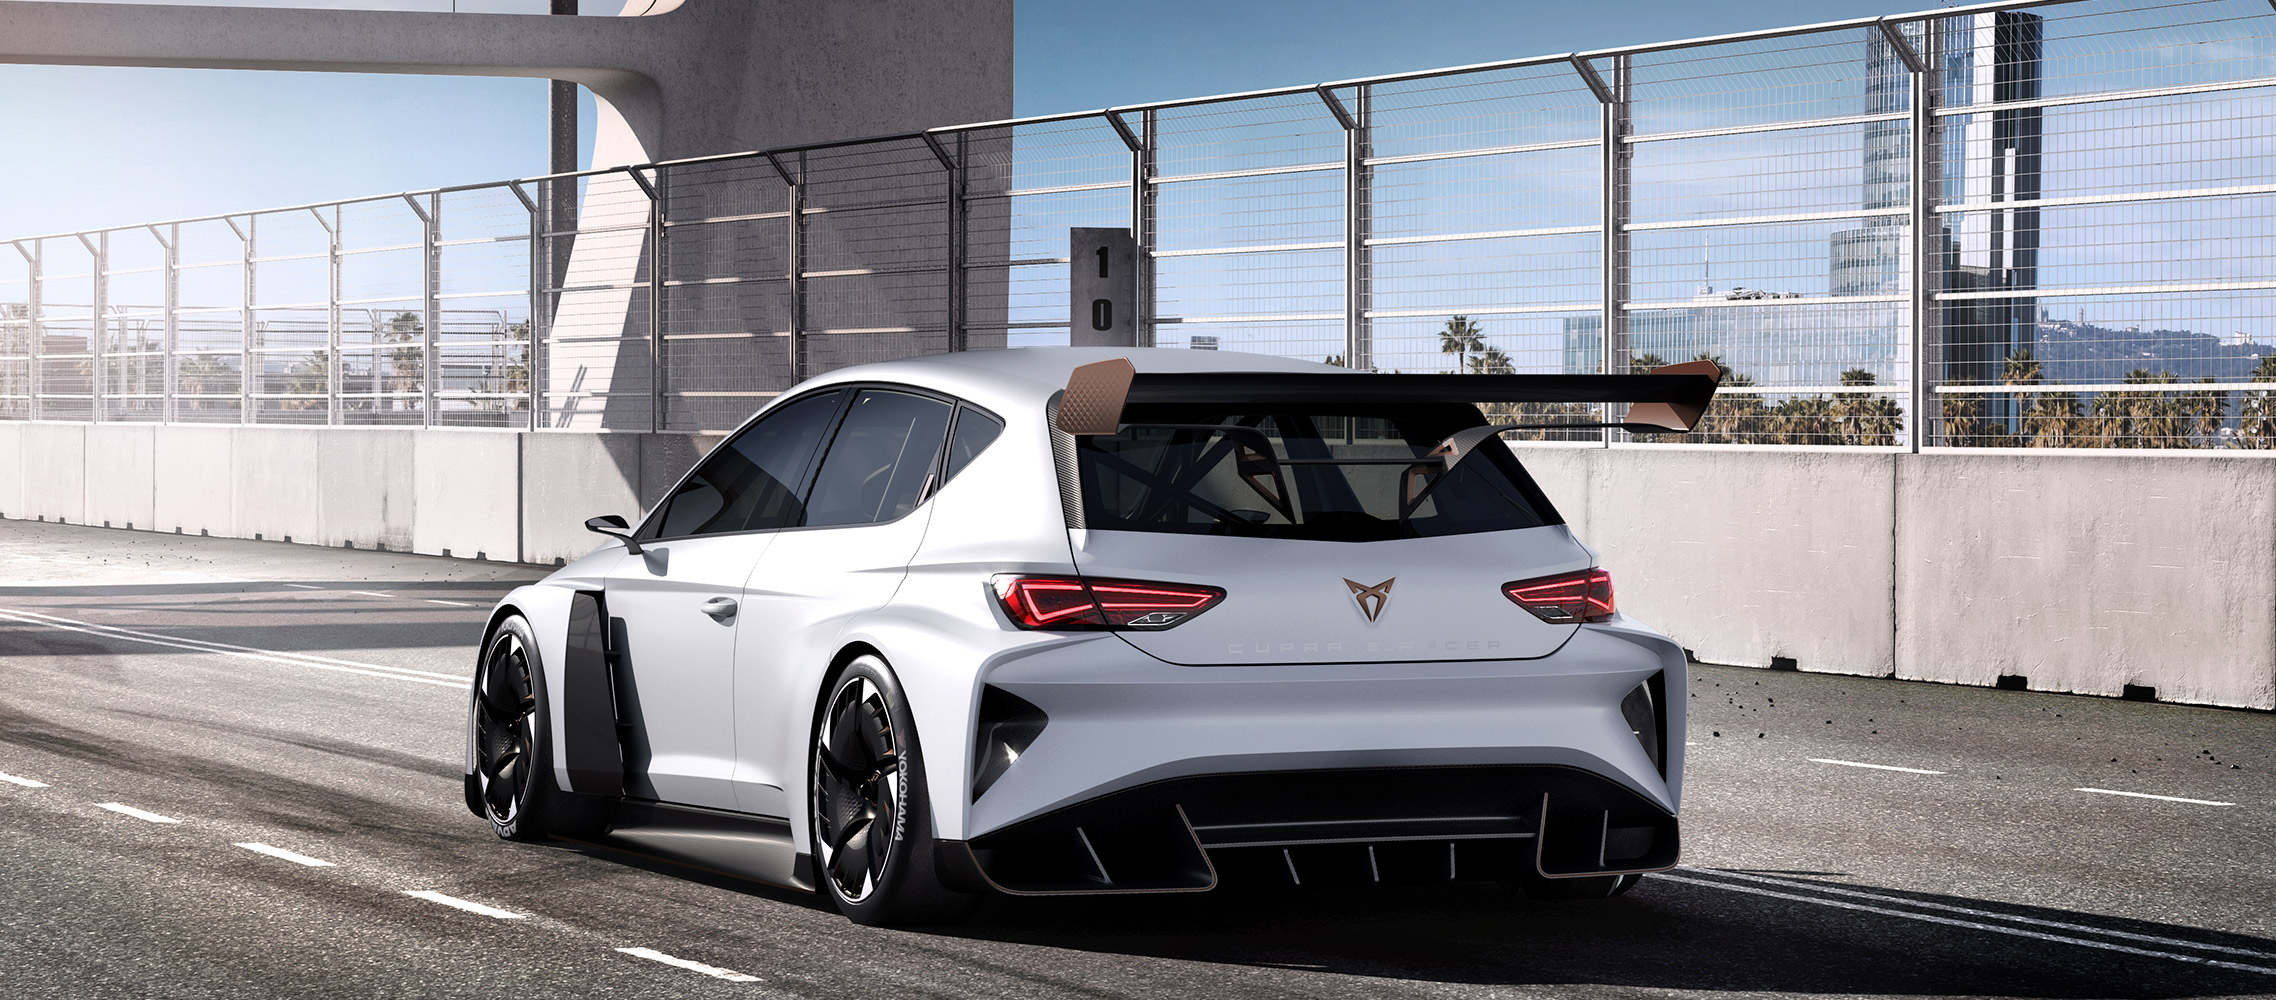 E-racer CUPRA rear view on the race track